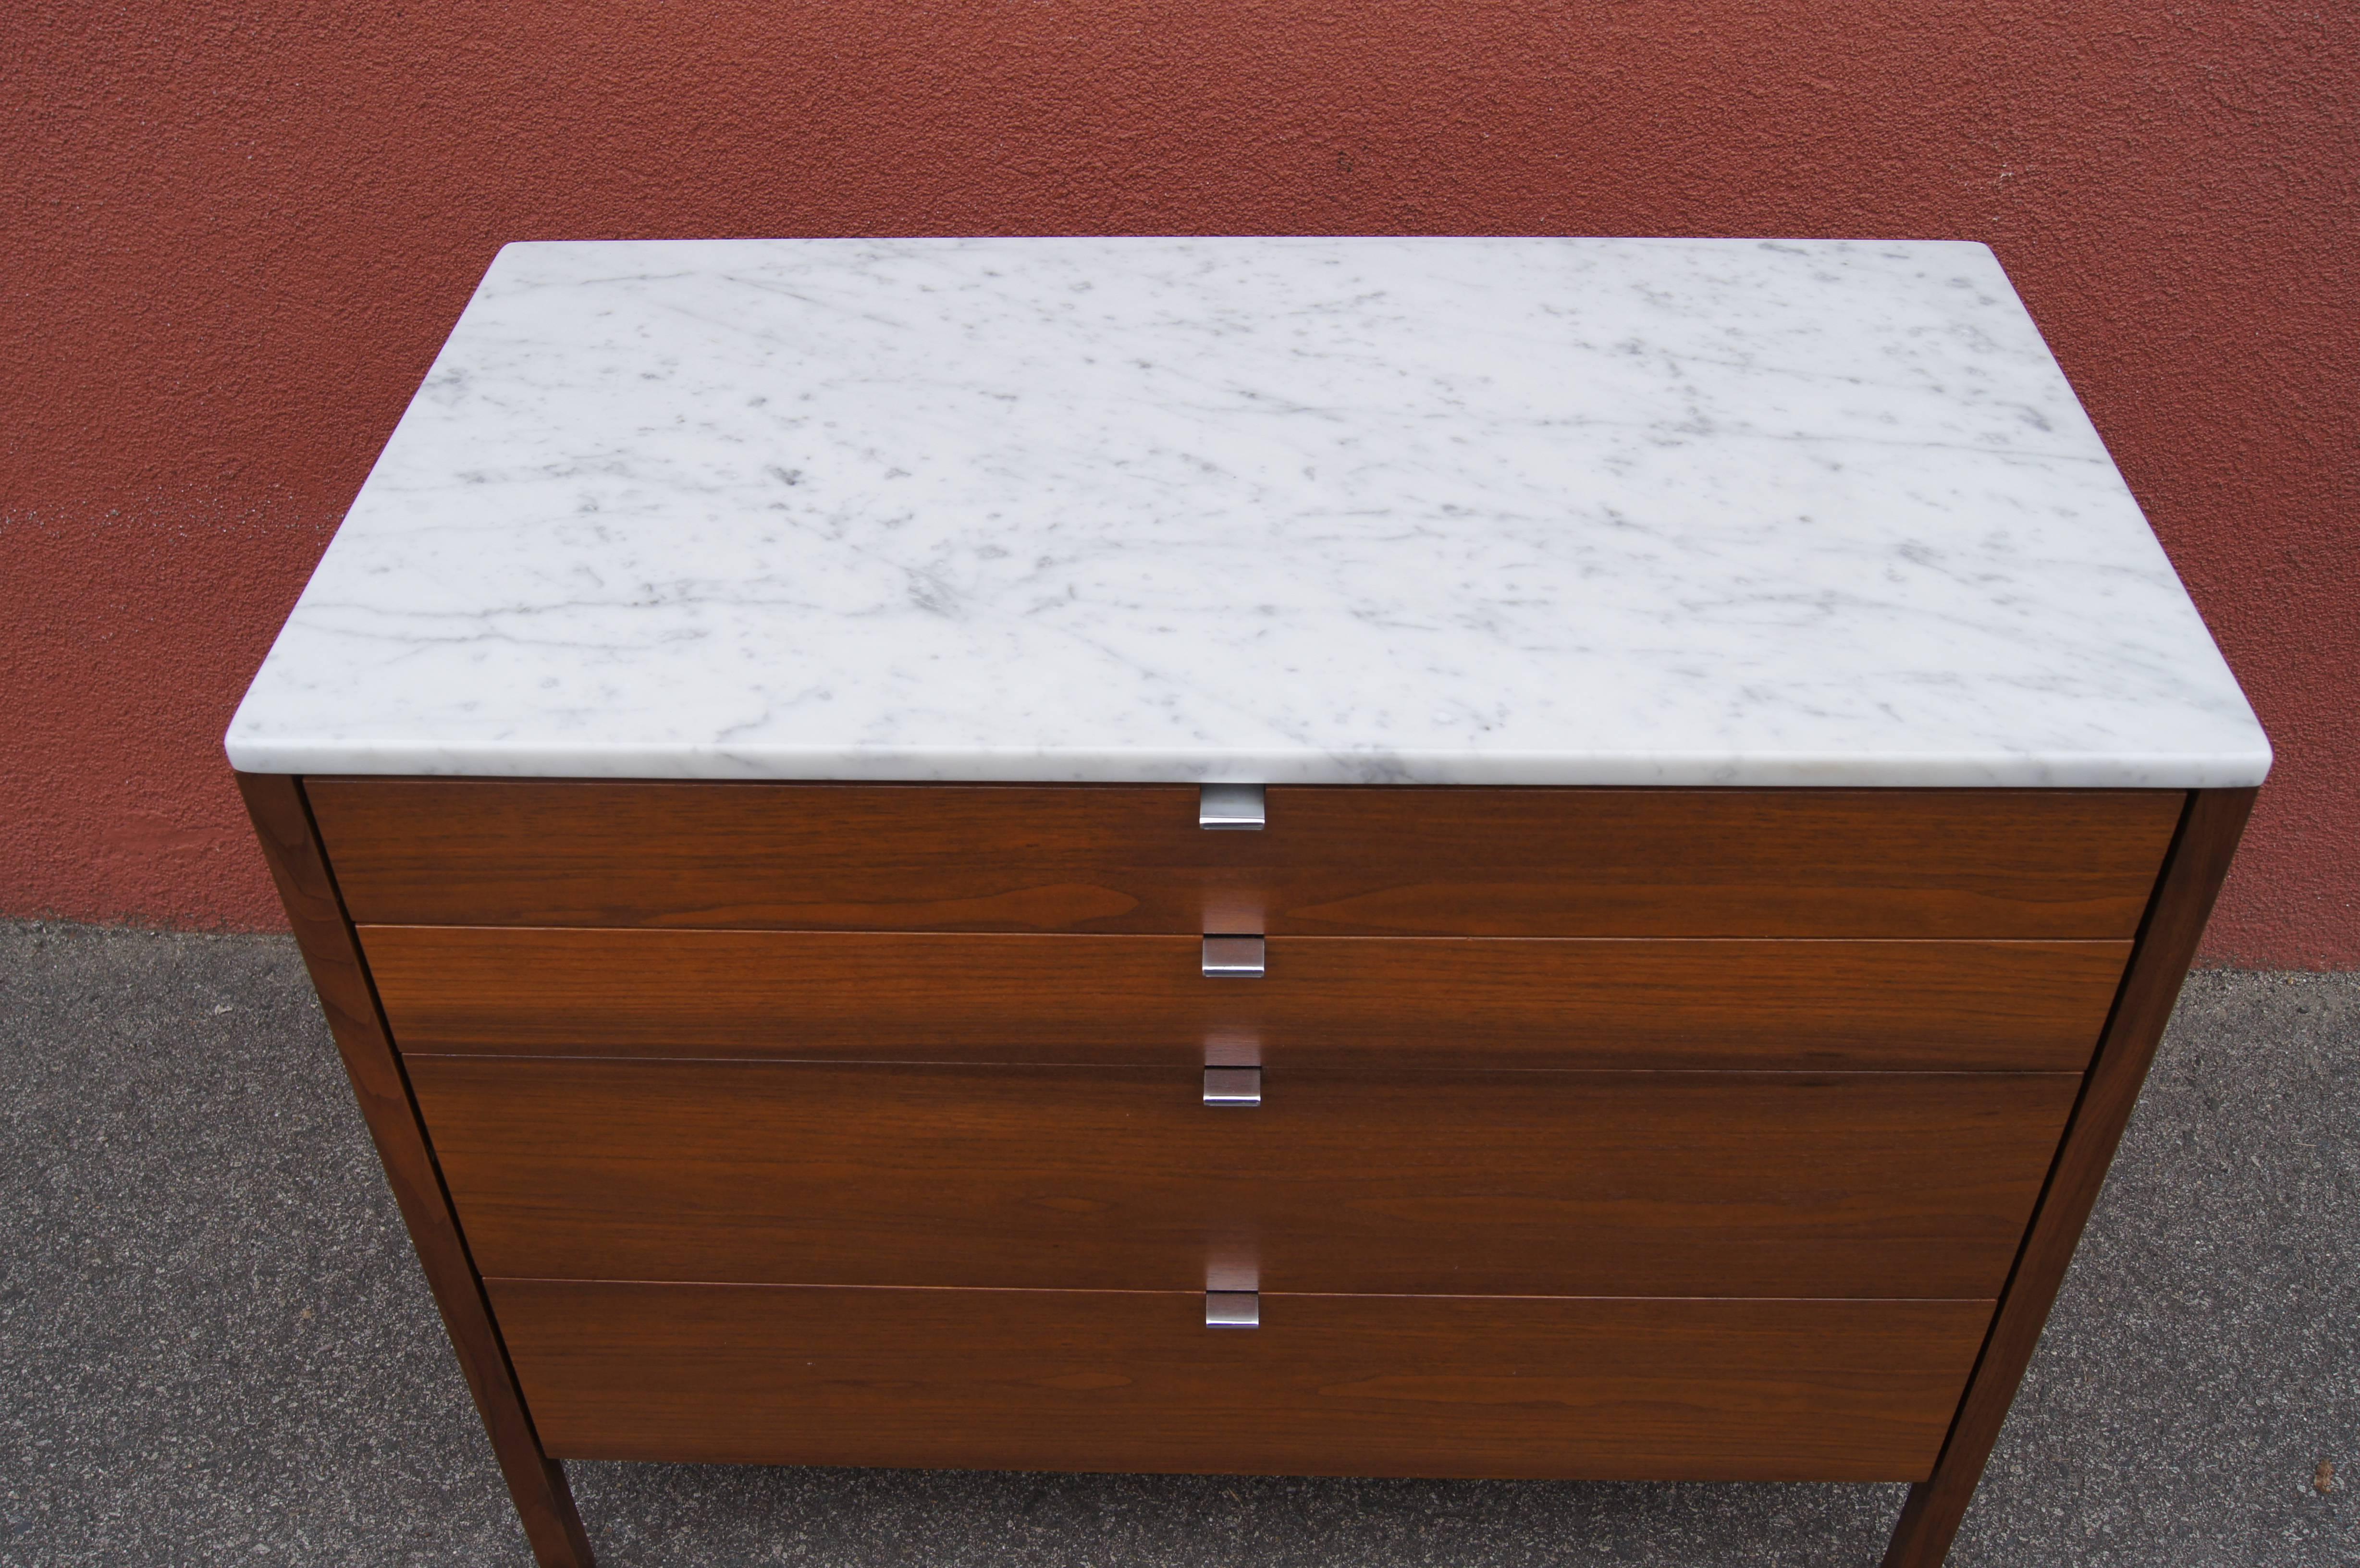 Designed in 1960 by Florence Knoll, this four-drawer dresser, model 325, has a clean-lined walnut case. This version features the luxury options of a marble top and chrome pulls.
